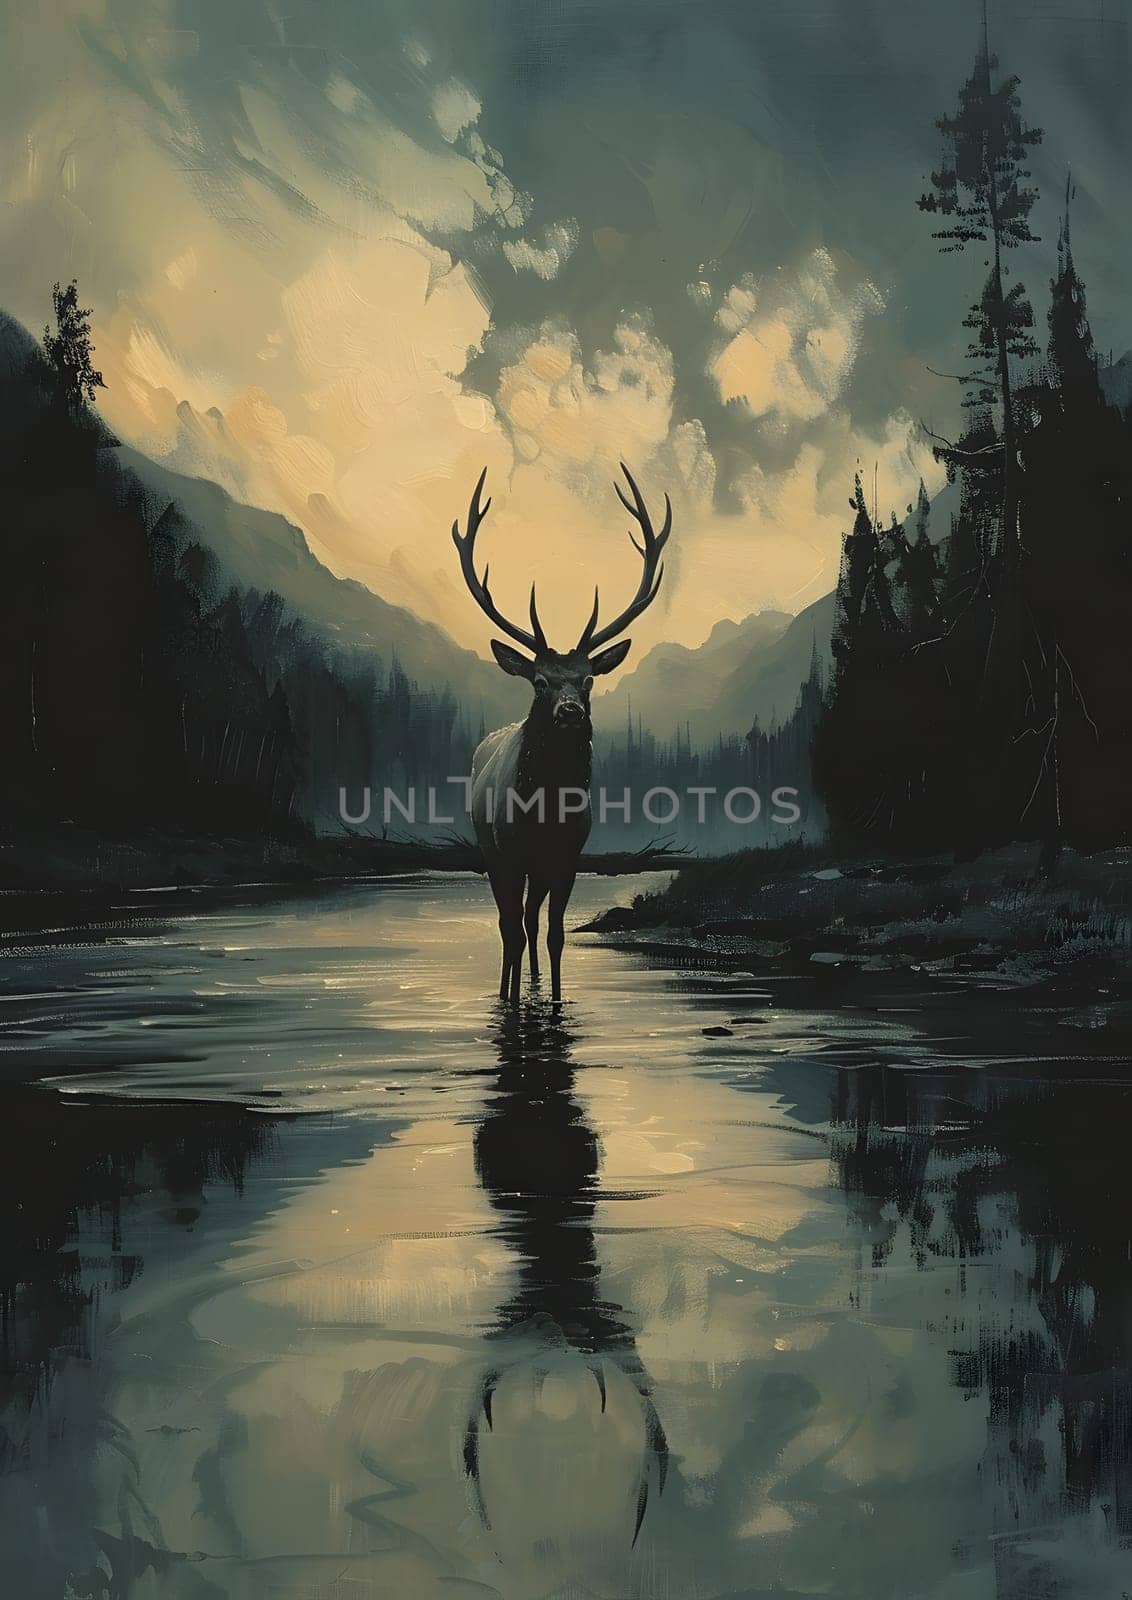 A deer stands gracefully in the tranquil river, surrounded by the natural landscape with trees, calm waters, and a cloudy sky above